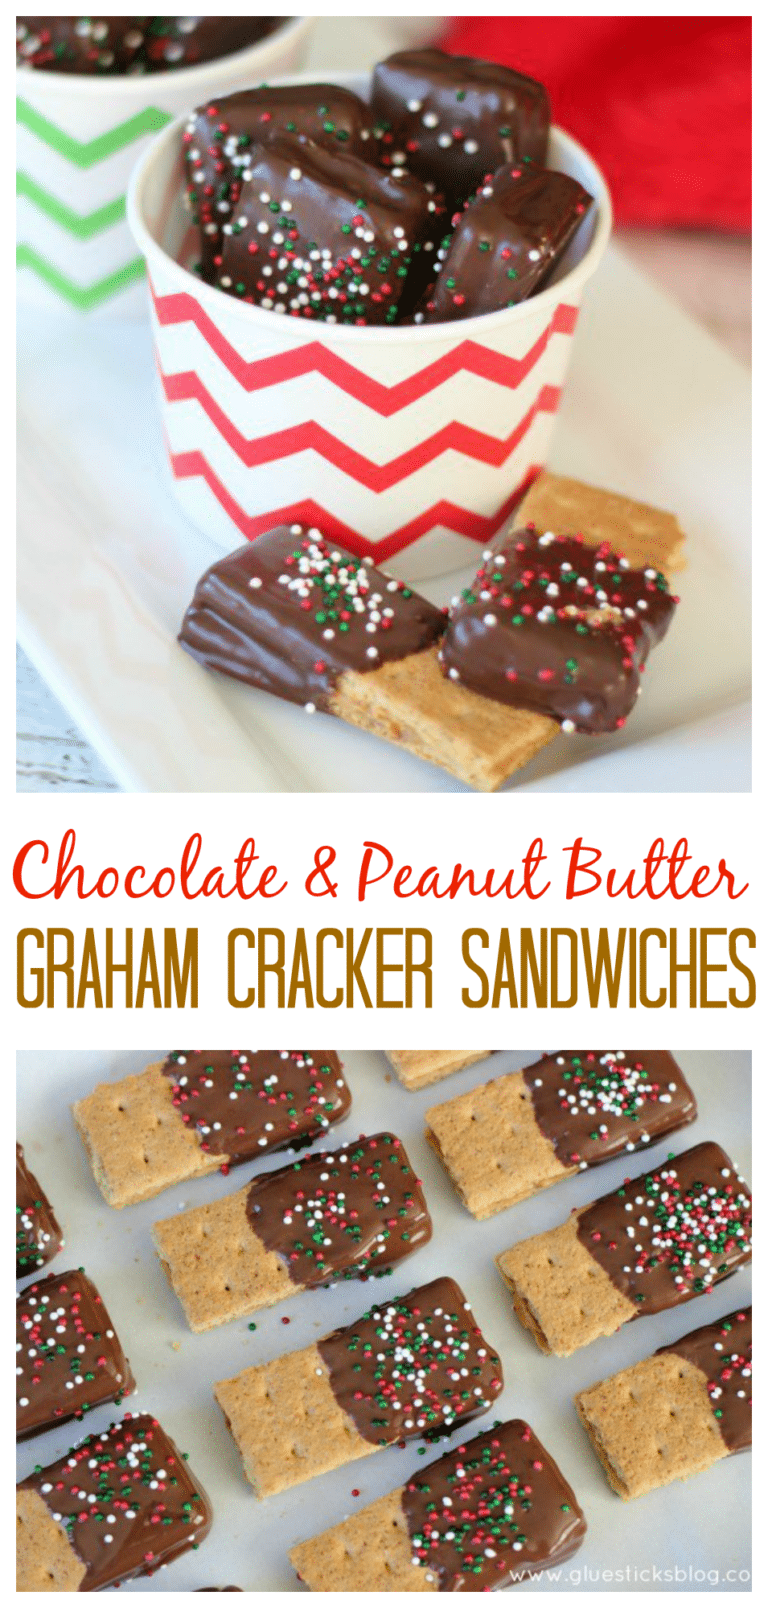 Peanut Butter Graham Cracker Sandwiches Dipped in Chocolate -   16 desserts For Parties graham crackers ideas